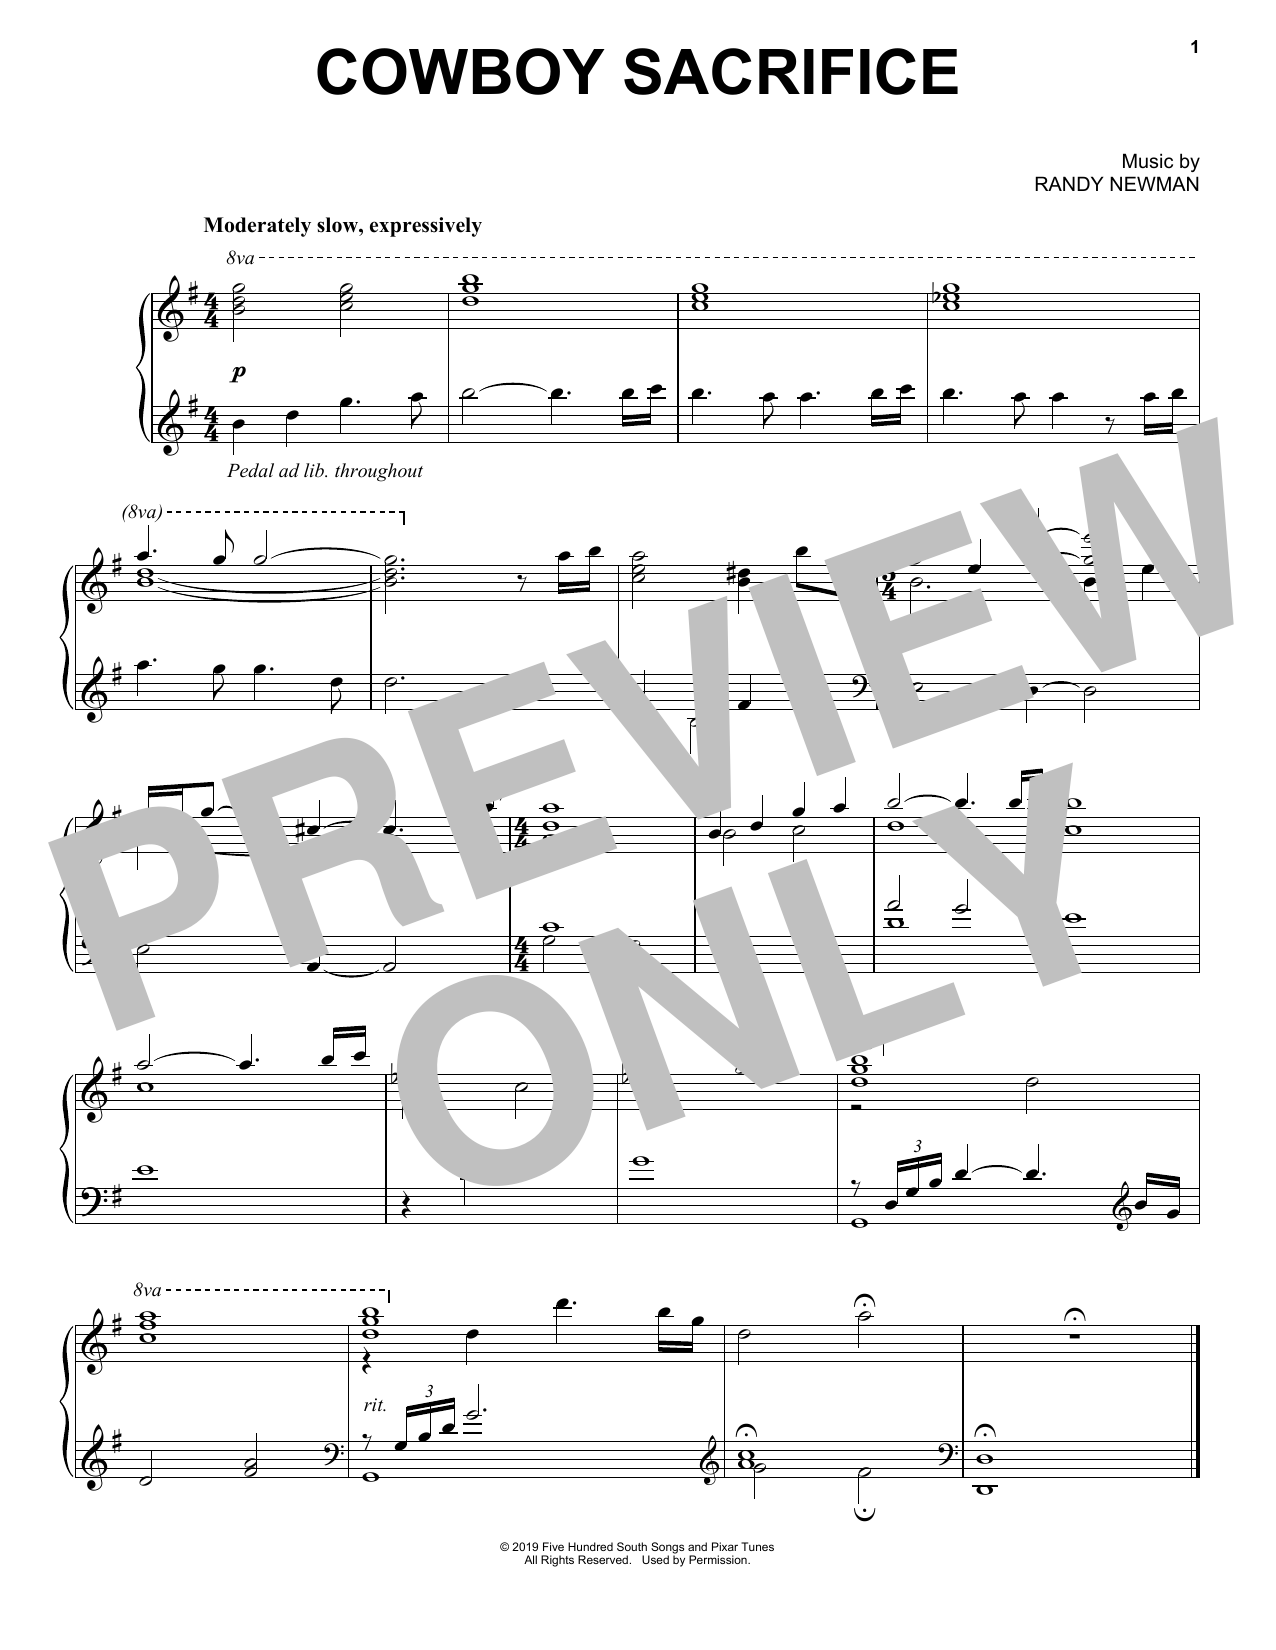 Download Randy Newman Cowboy Sacrifice (from Toy Story 4) Sheet Music